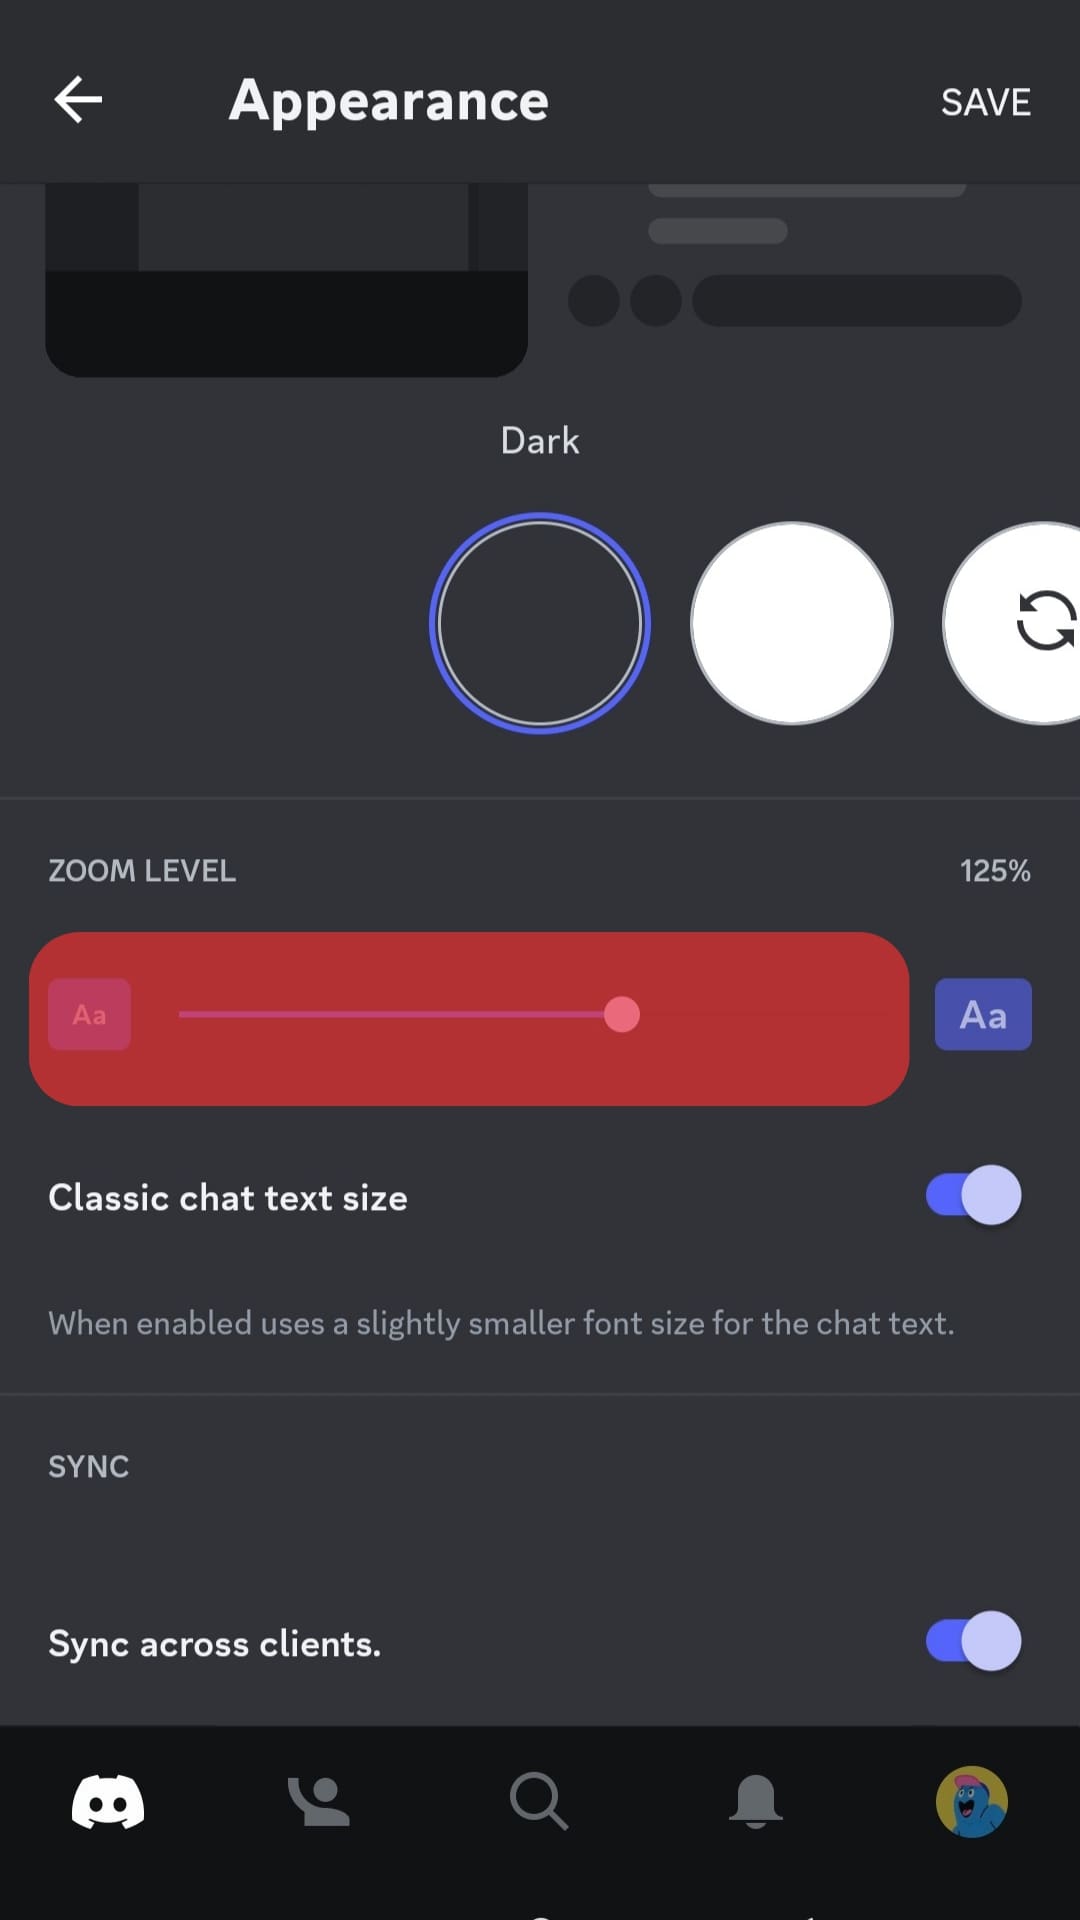 Drag The Slider To The Right Under Zoom Level